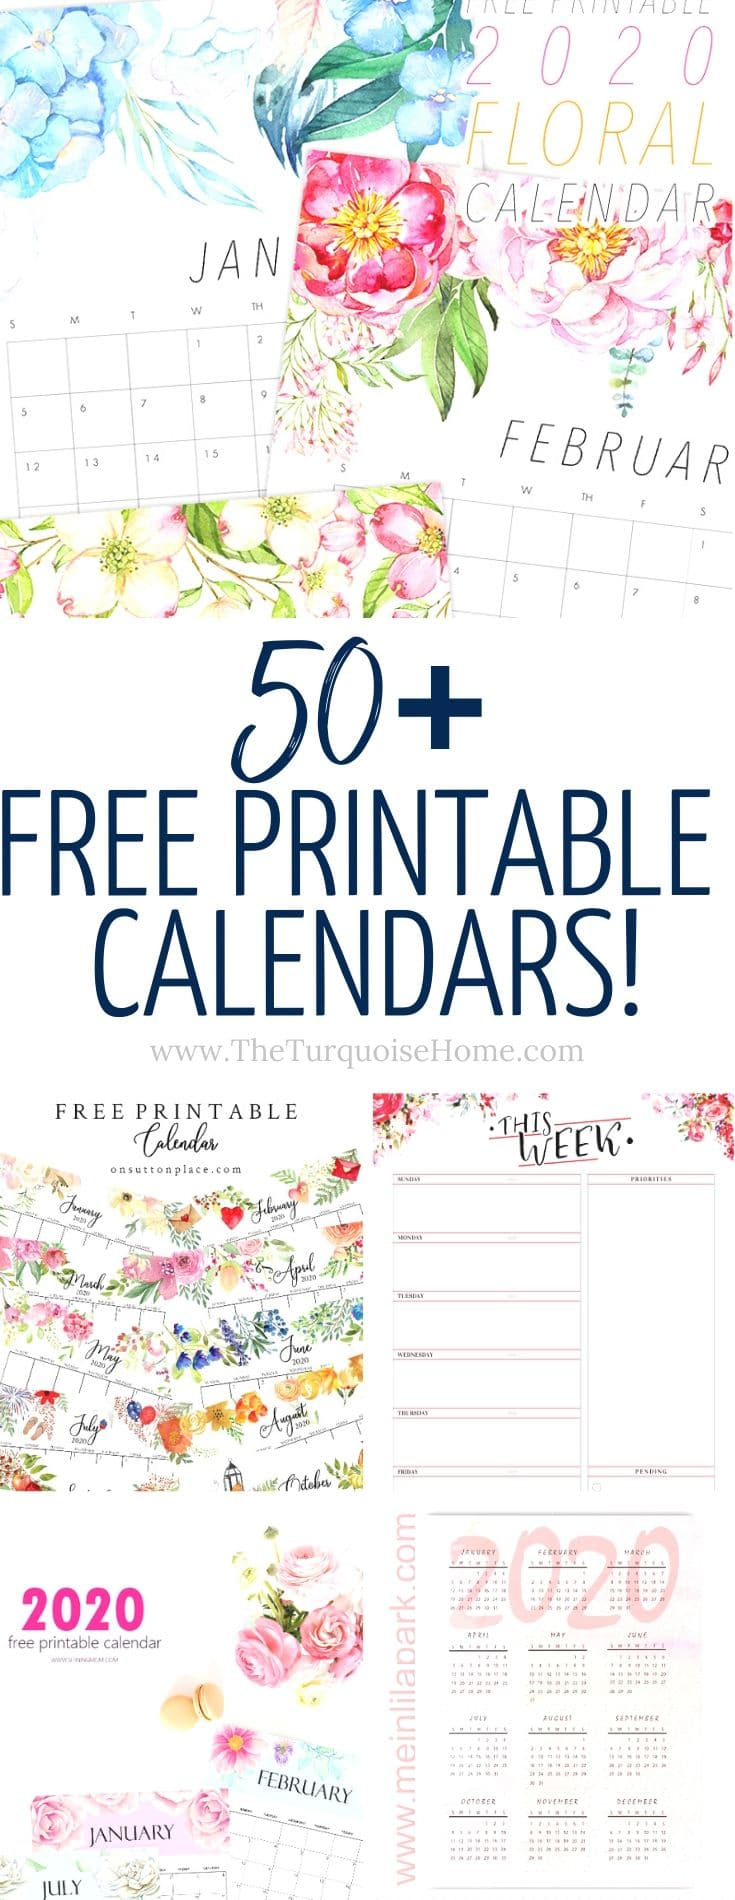 50+ Free Printable Calendars For 2021 | The Turquoise Home